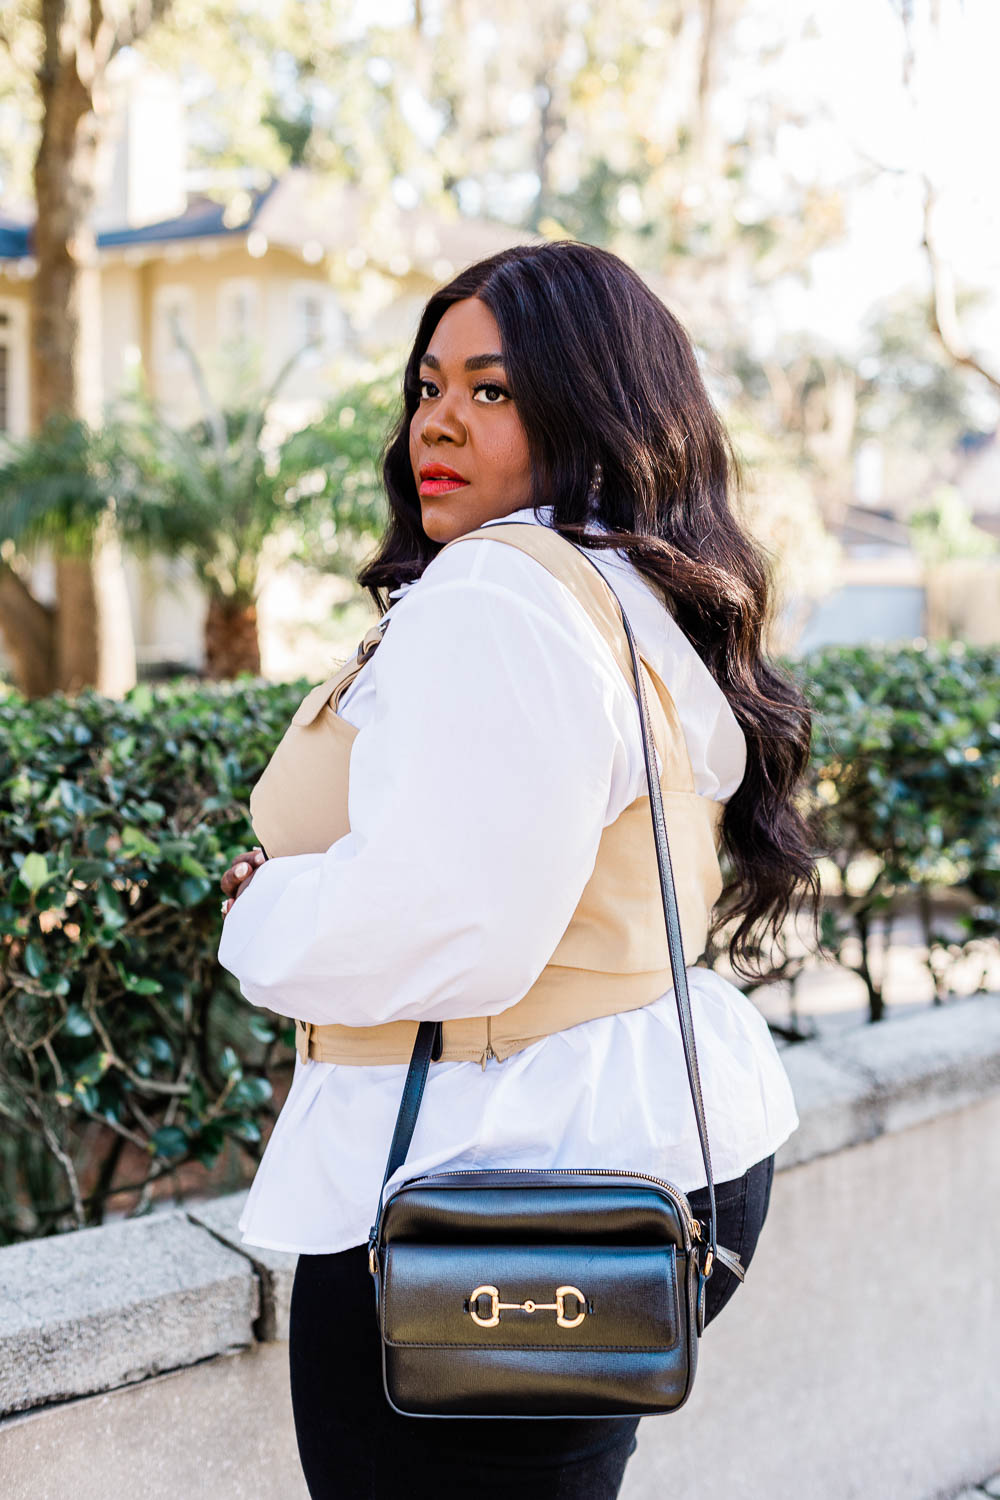 Plus Size Fashion, Thamarr, Musings of a Curvy Lady, Plus Size Flare Jeans, Anthropologie Model, White Button Down Shirt, How to Style a White Button Down Shirt